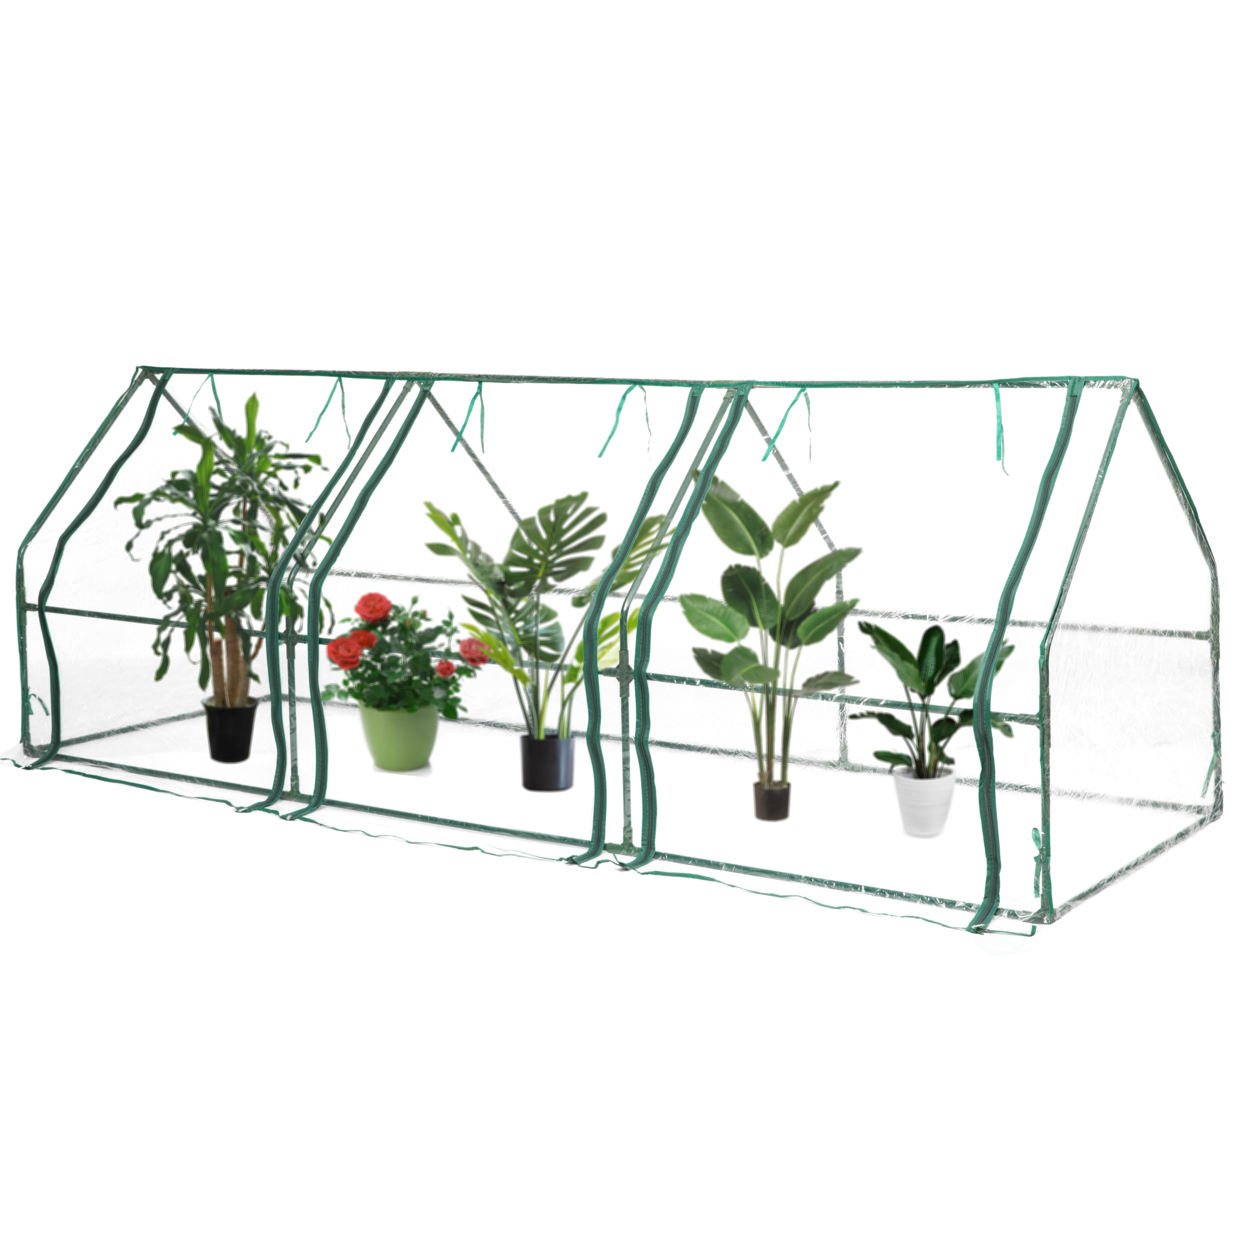 Green Outdoor Waterproof Portable Plant Greenhouse With 2 Clear Zippered Windows - Large